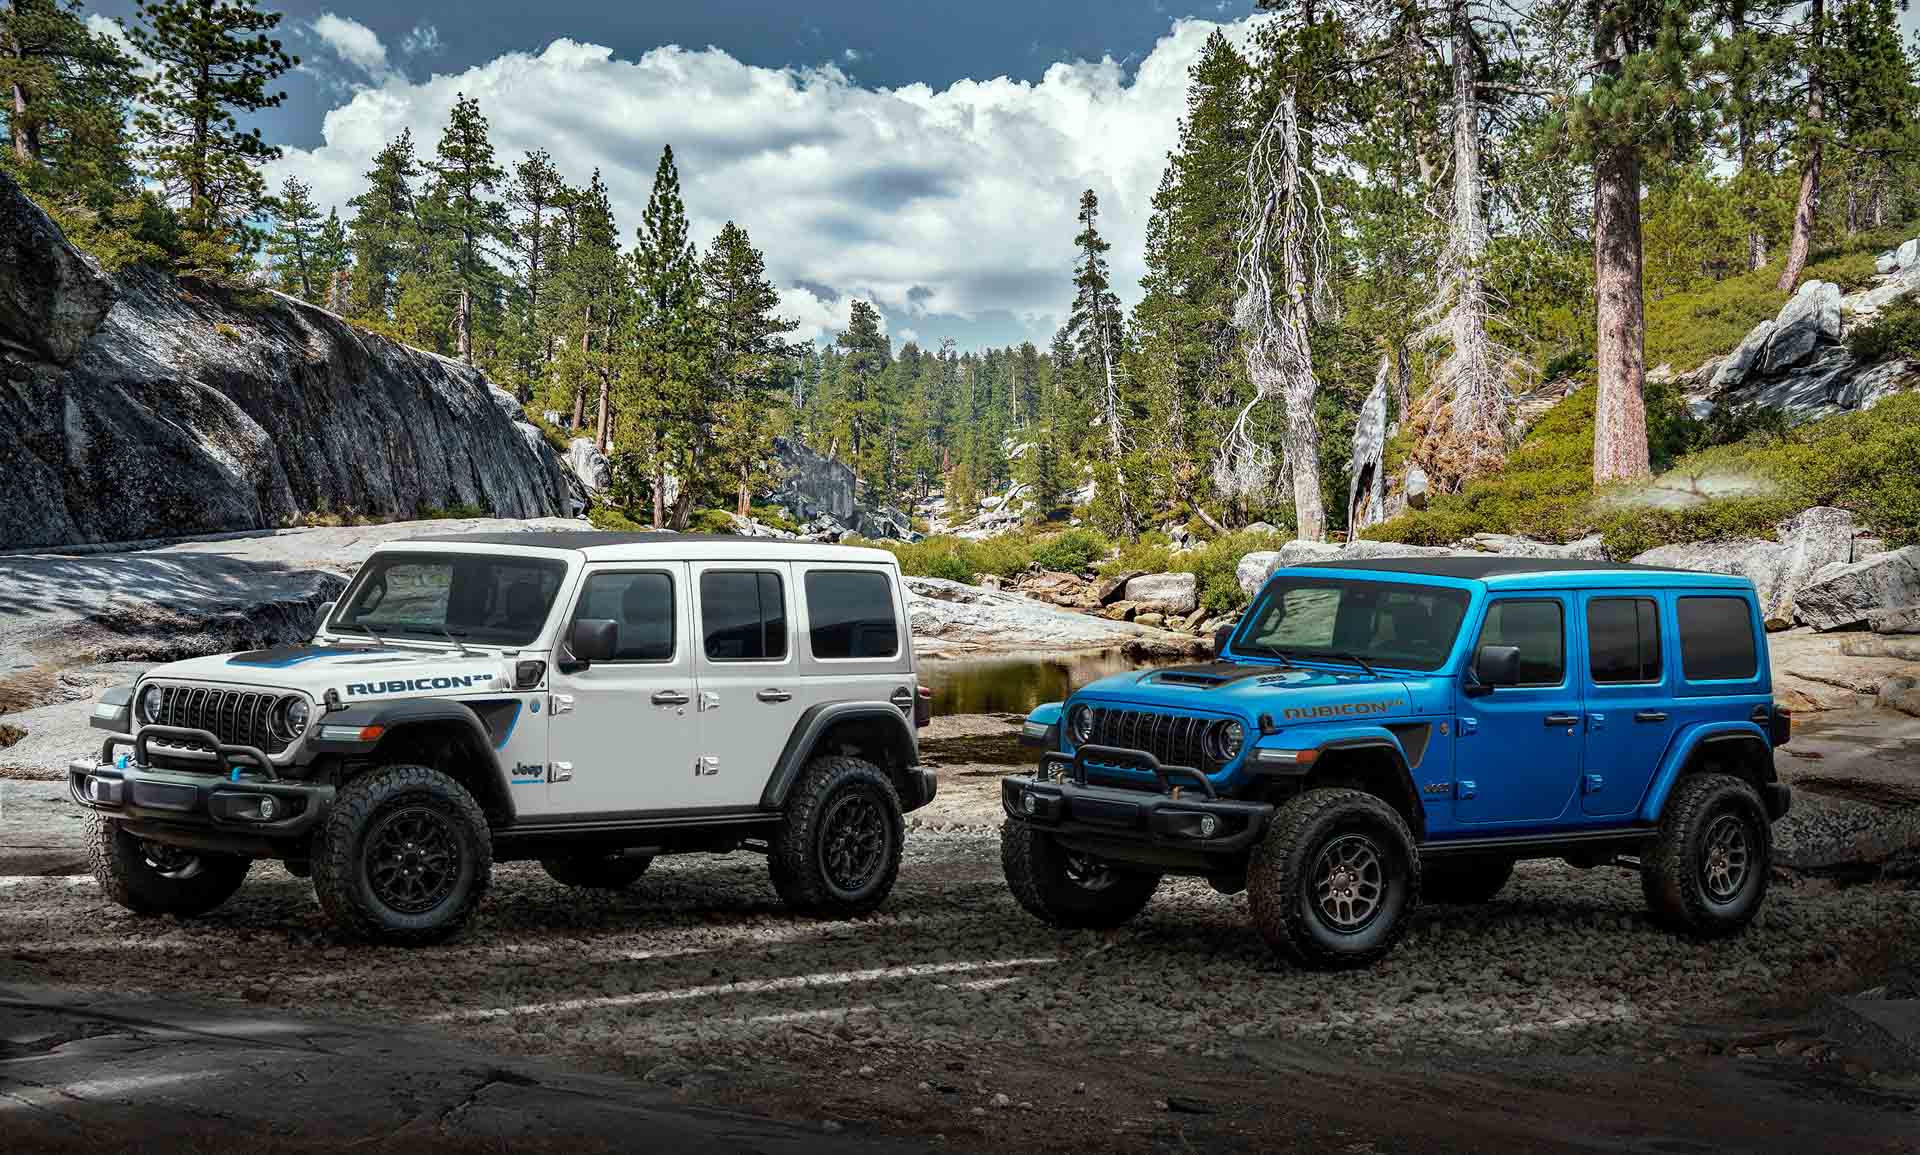 2023 Jeep Wrangler special editions celebrate two decades of Rubicon